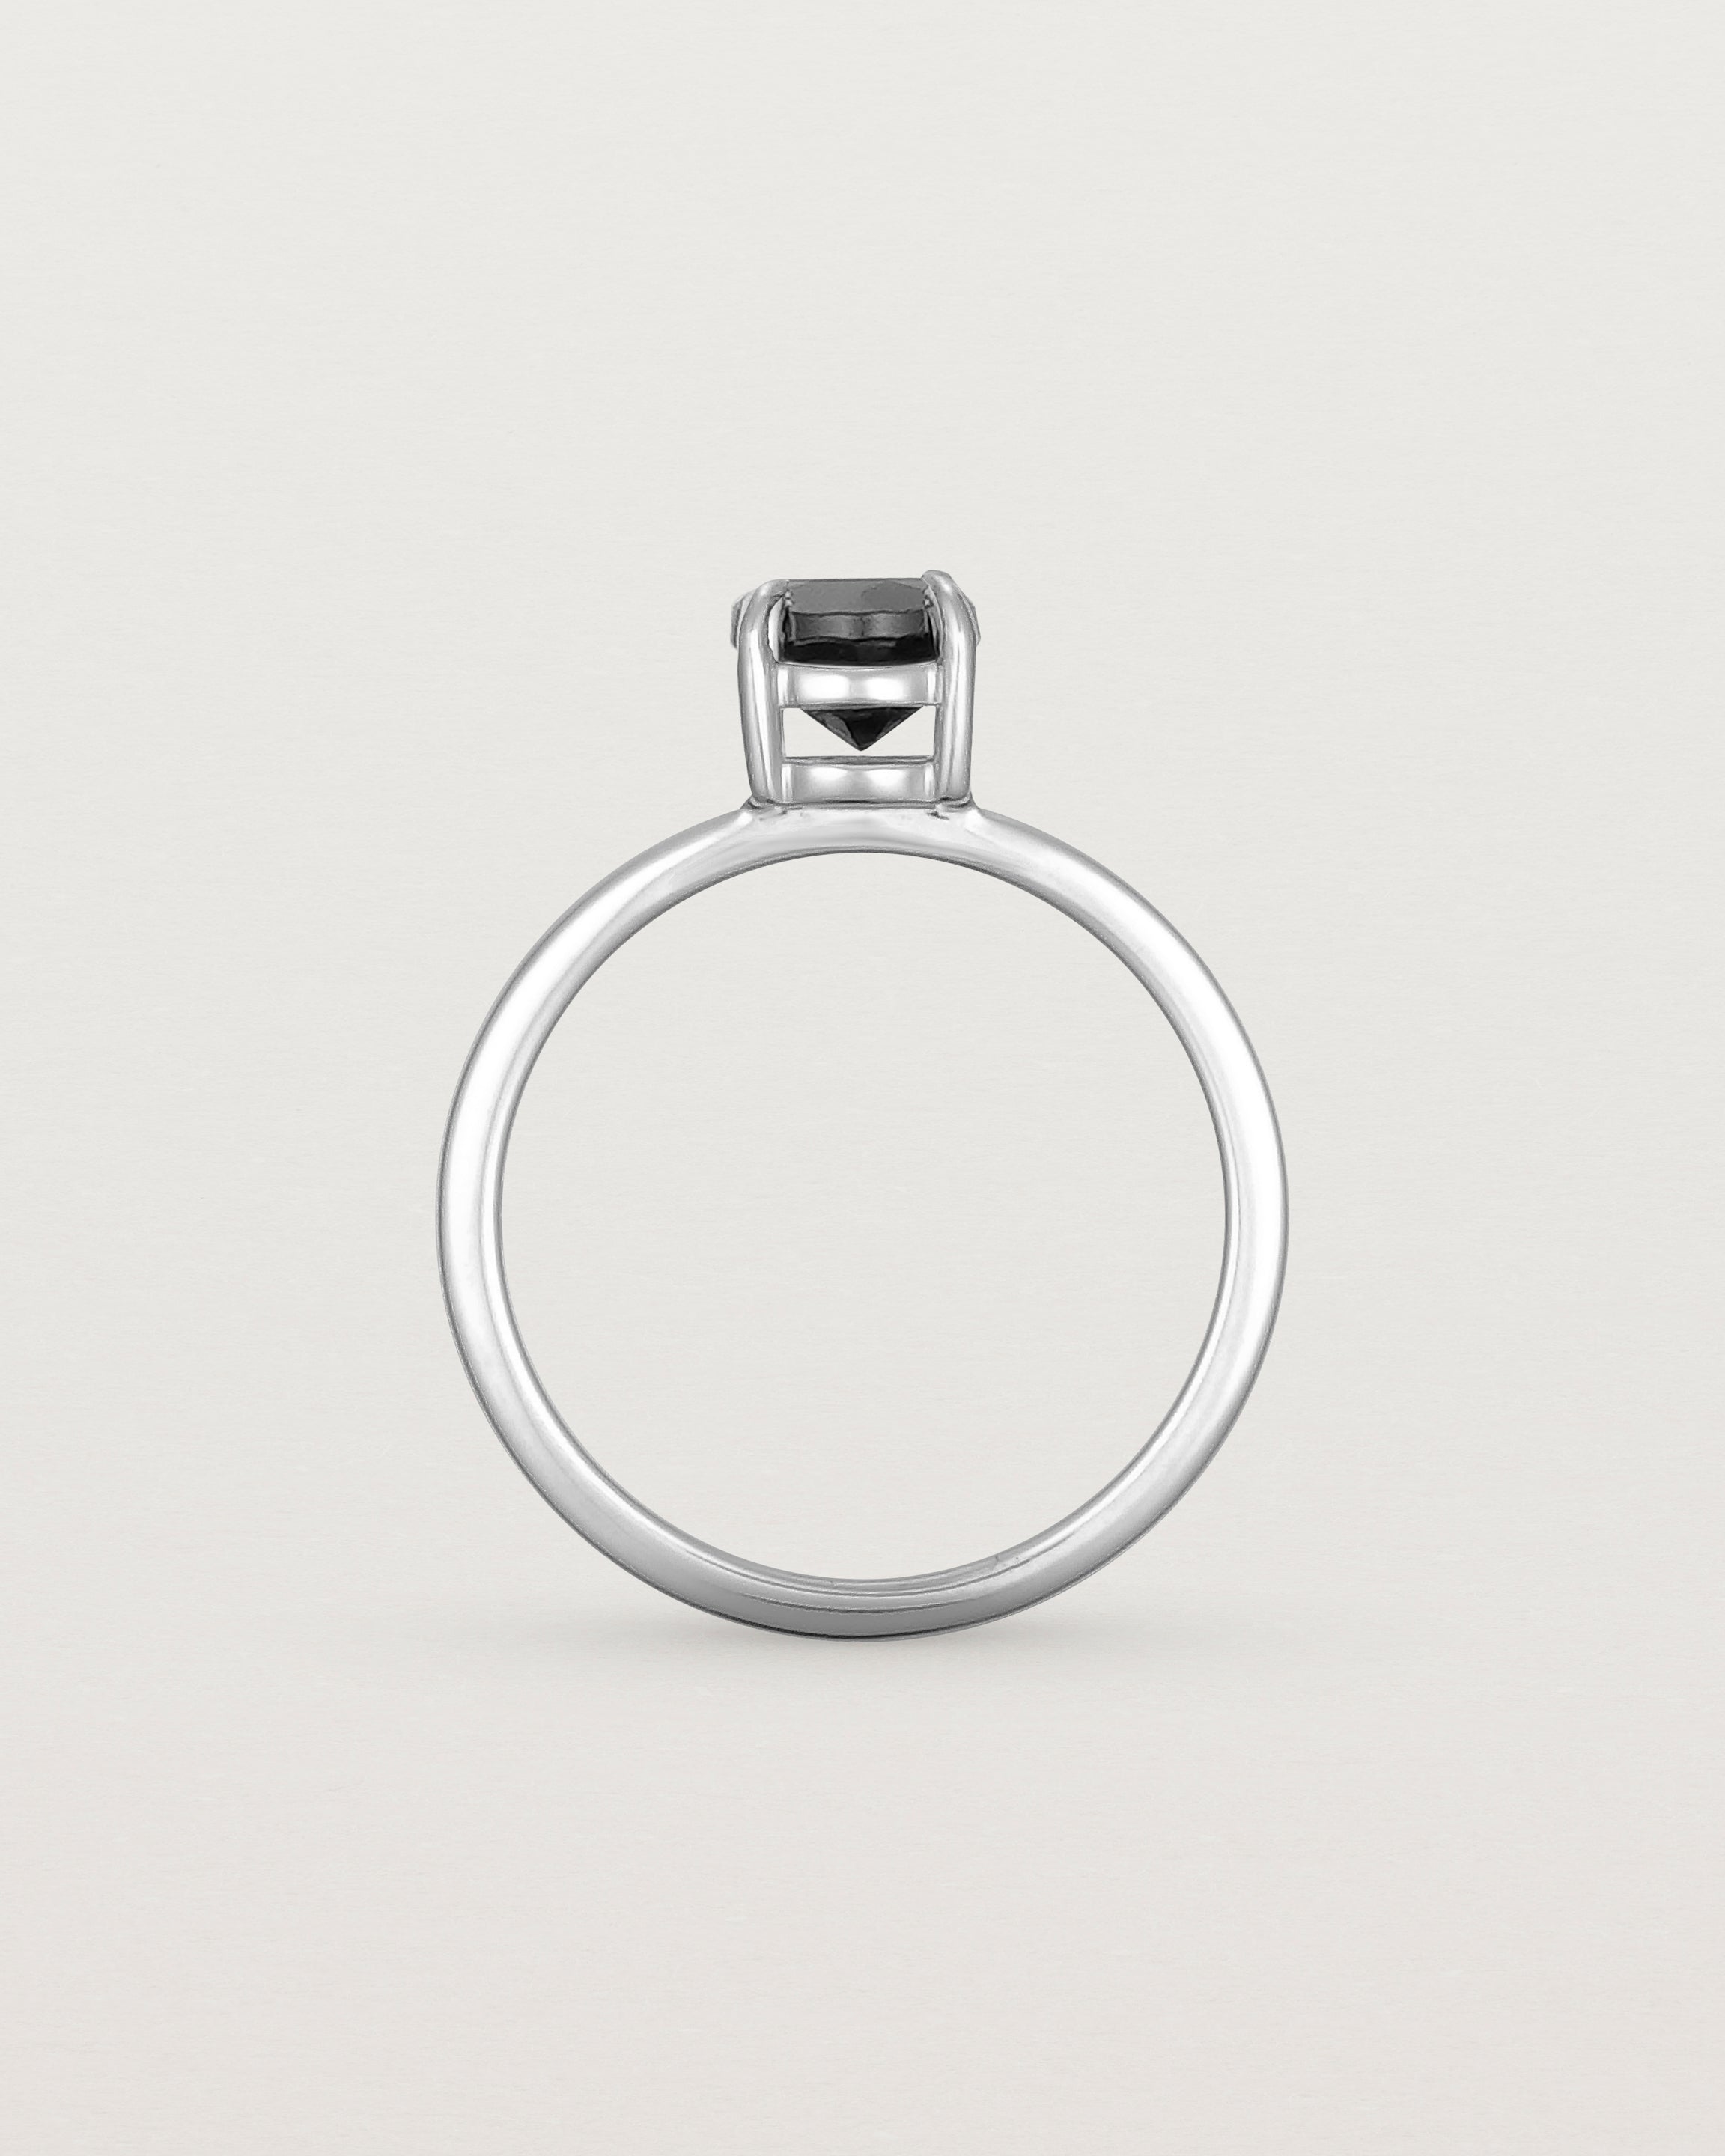 Standing view of the Petite Una Round Solitaire | Black Spinel | White Gold.